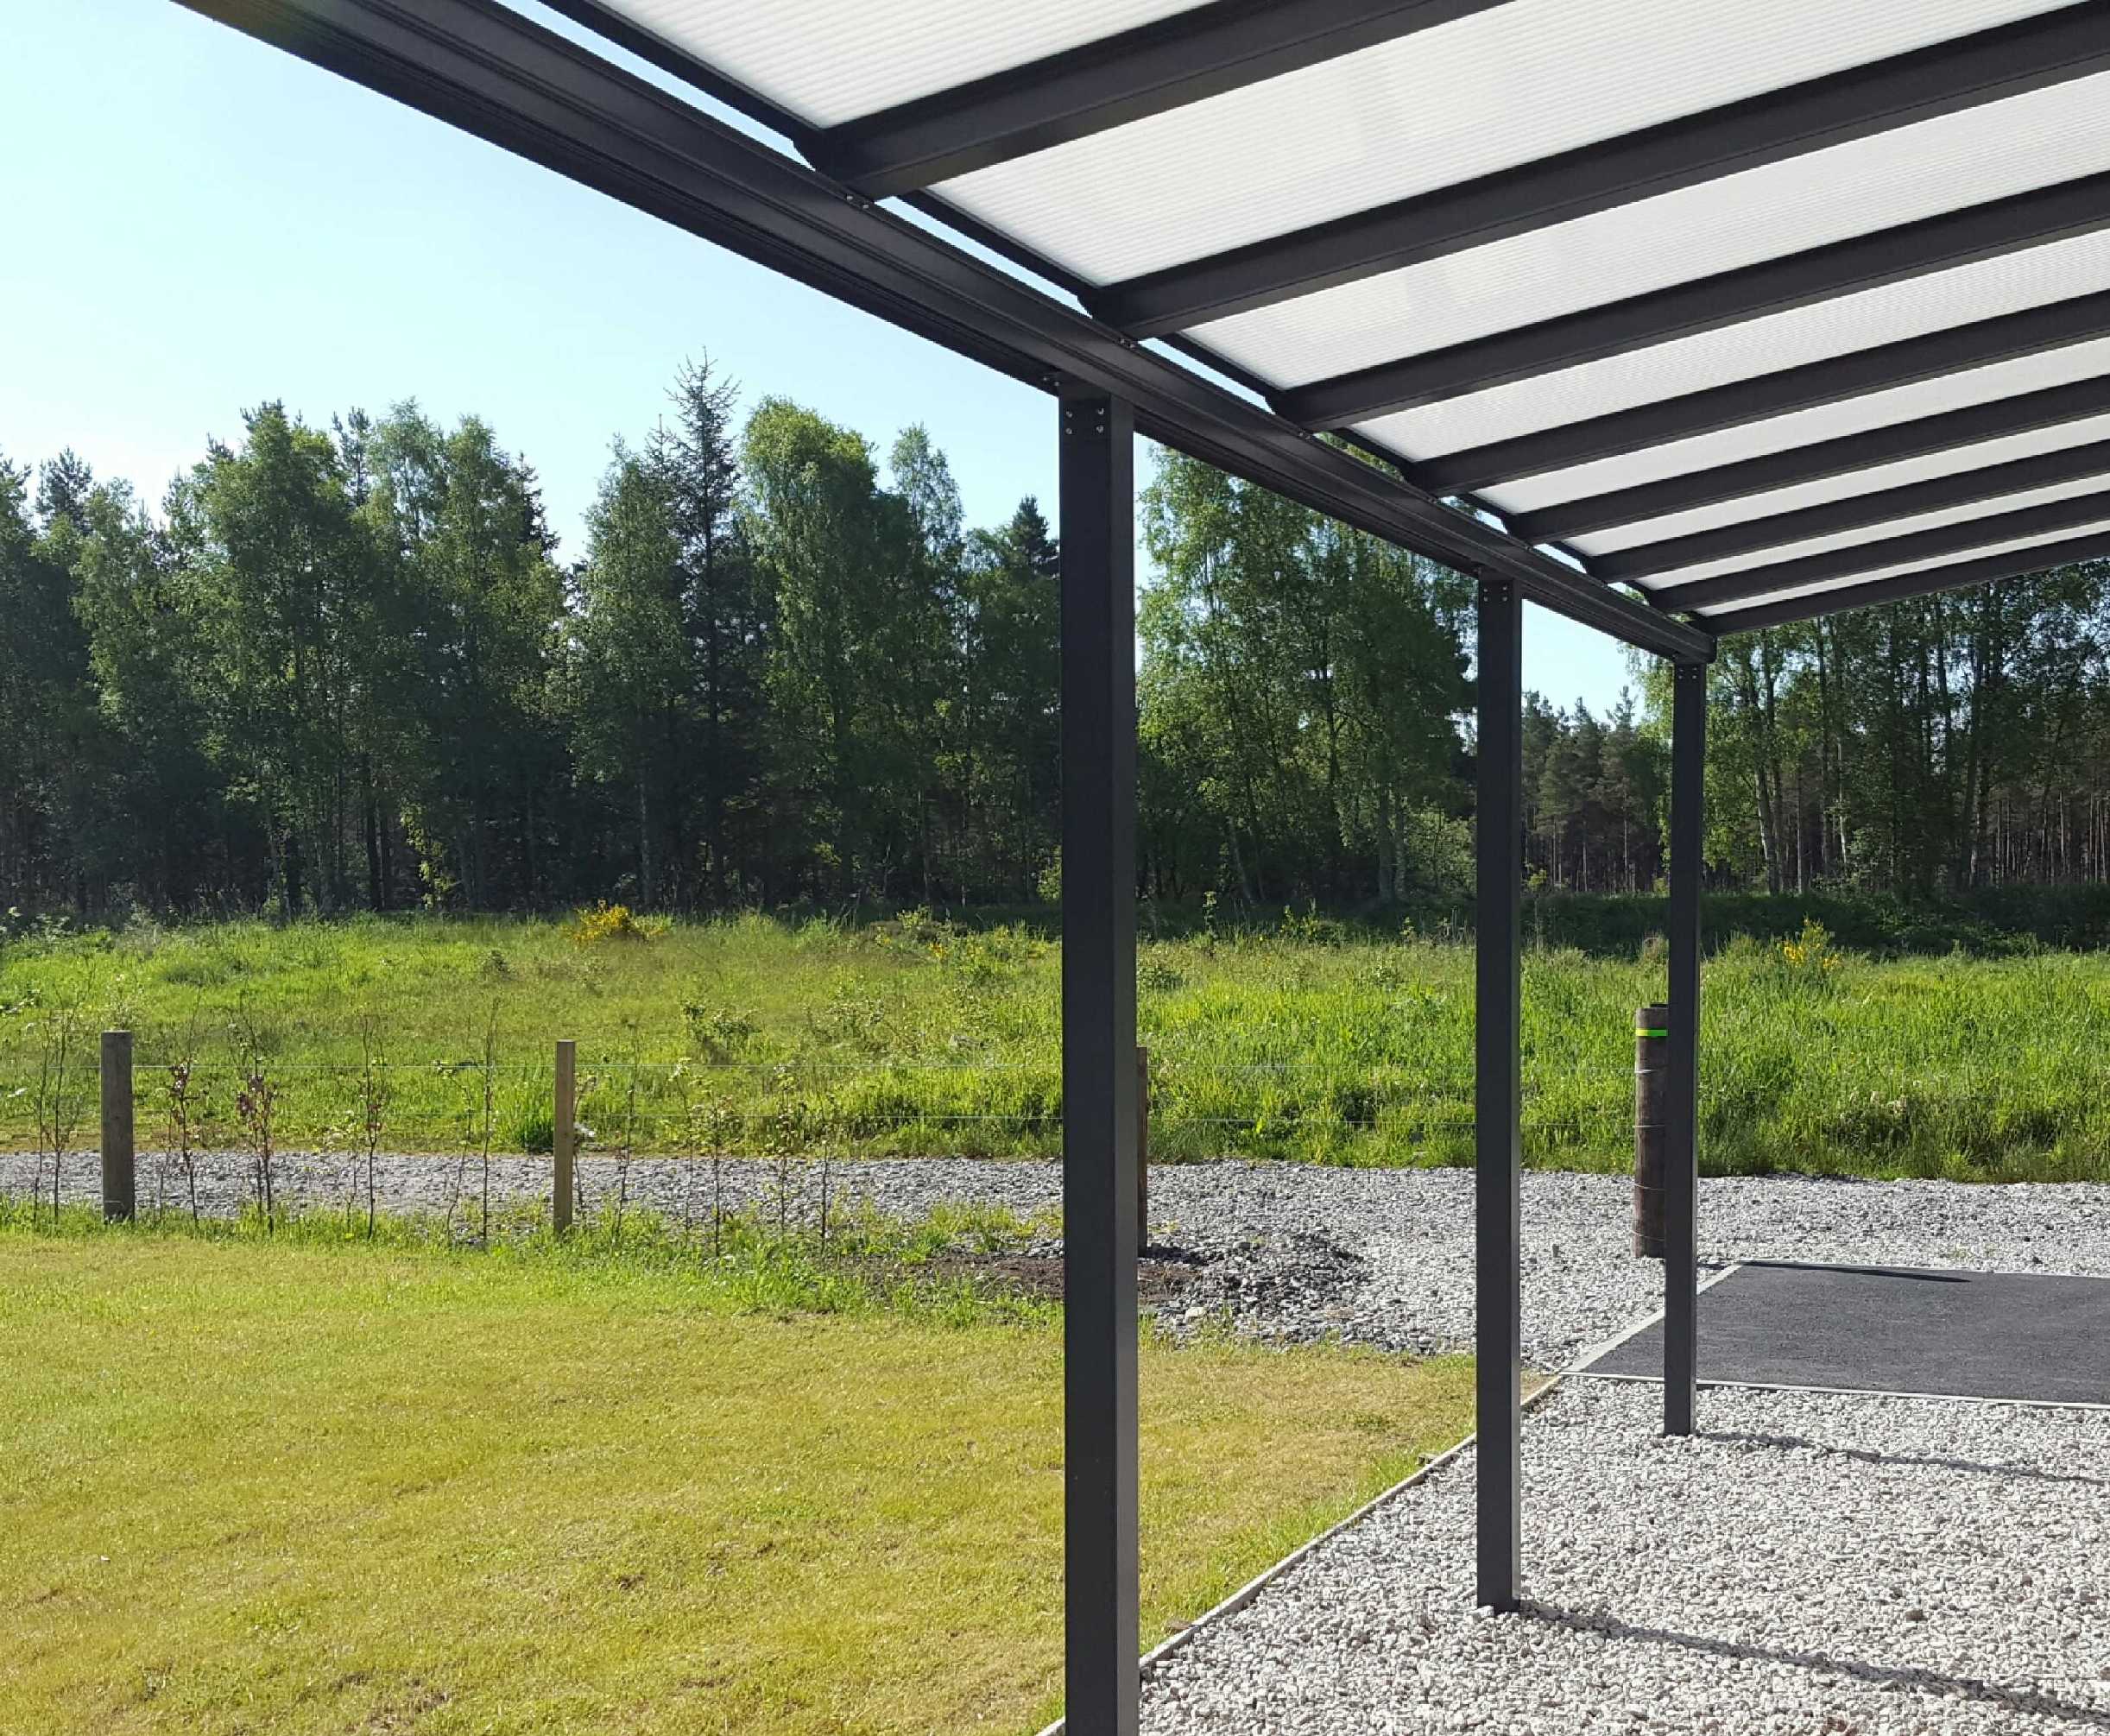 Omega Smart Lean-To Canopy, Anthracite Grey, 6mm Glass Clear Plate Polycarbonate Glazing - 7.0m (W) x 2.0m (P), (4) Supporting Posts